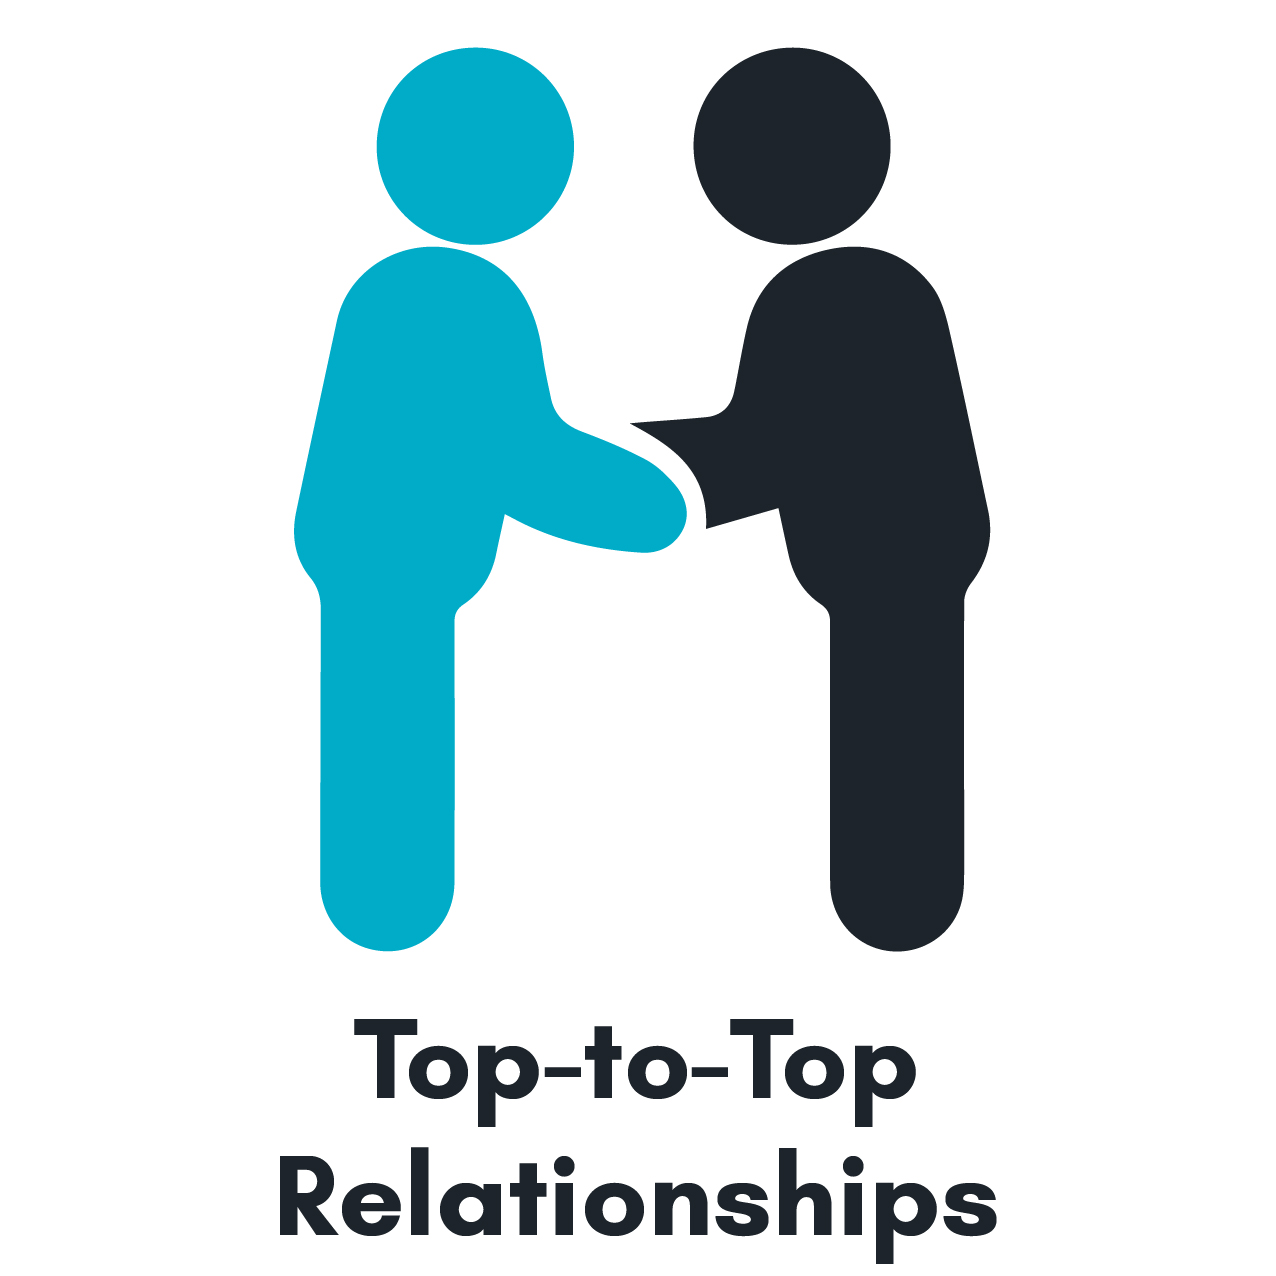 ServicesIcons_Top-to-TopRelationships.jpg